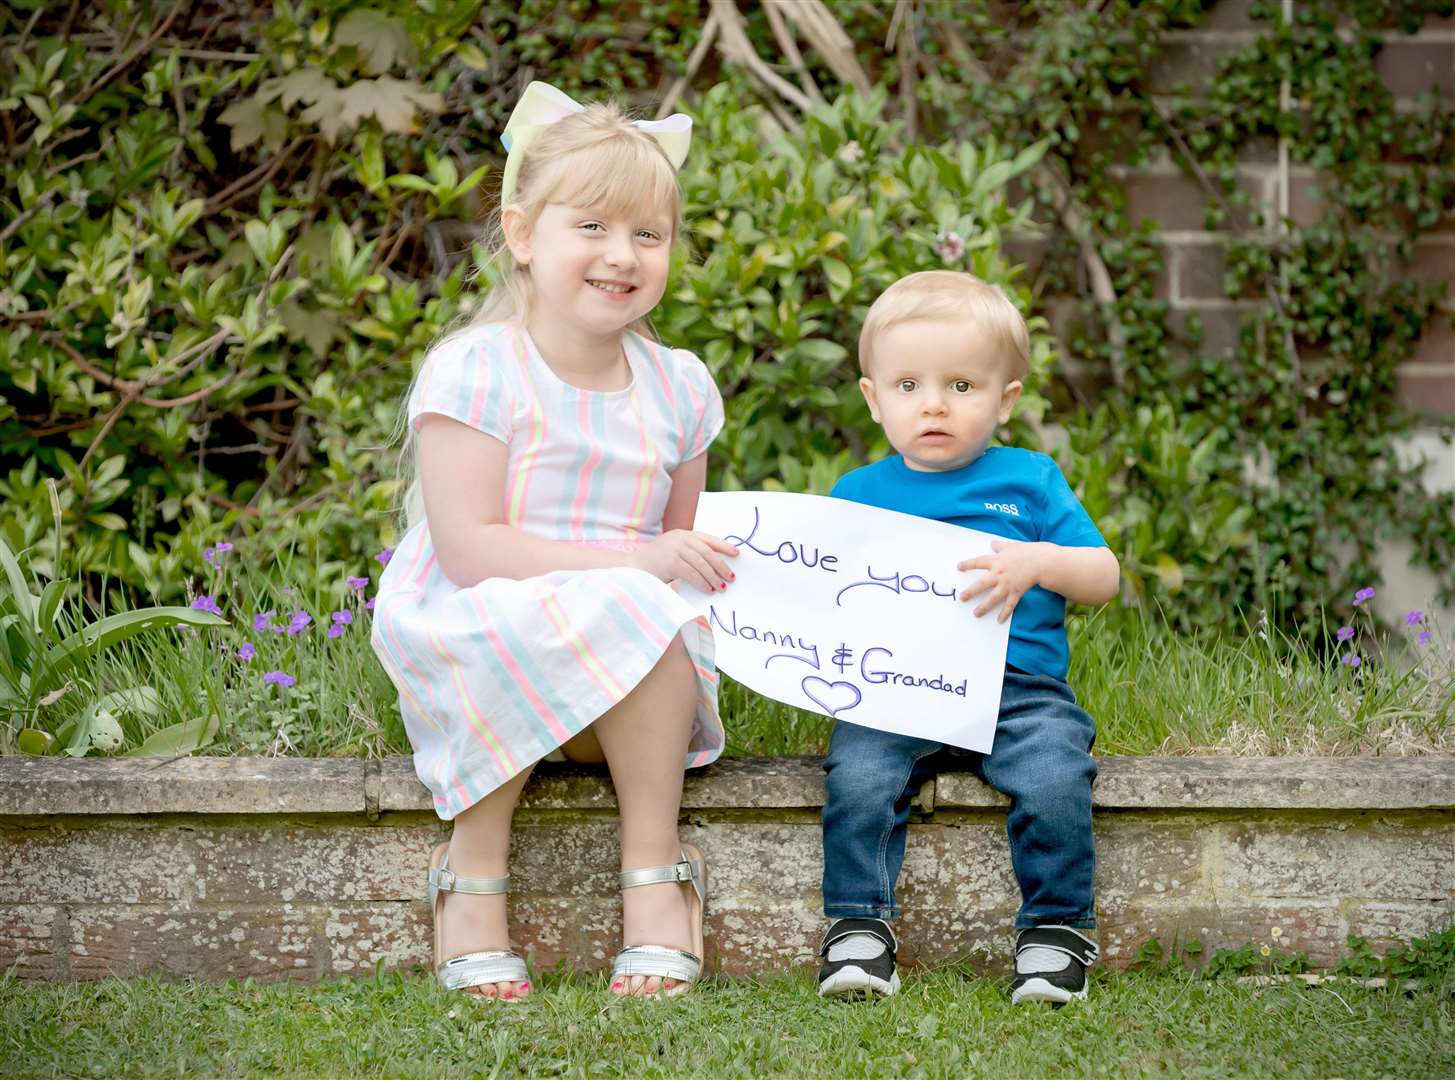 Scarlett and Harry used the photos to wish their nanny a happy birthday, as they couldn't be with her. Photo: Estelle Thompson Photography